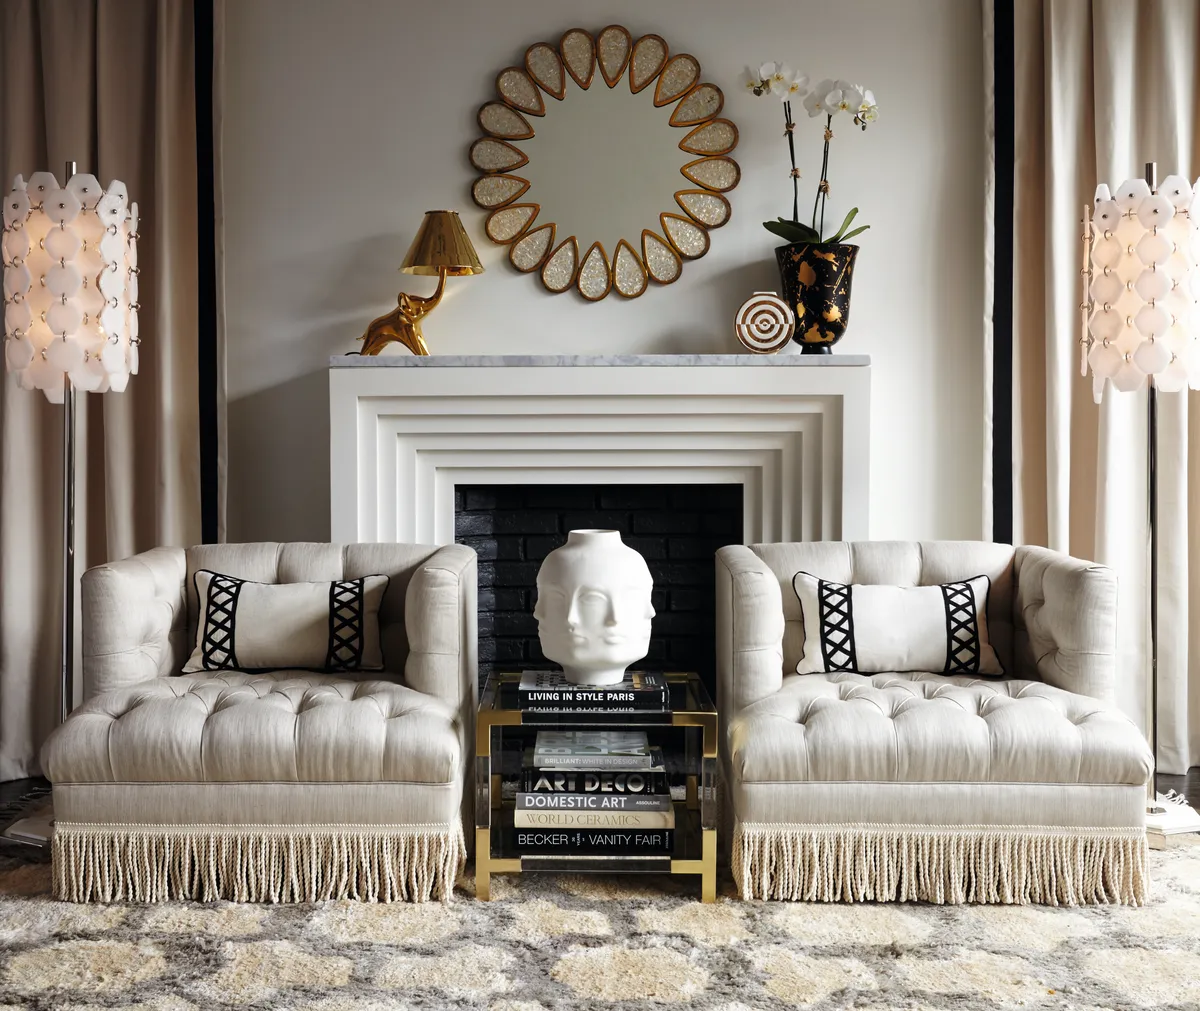 Two fringed armchairs flank an Art Deco fireplace